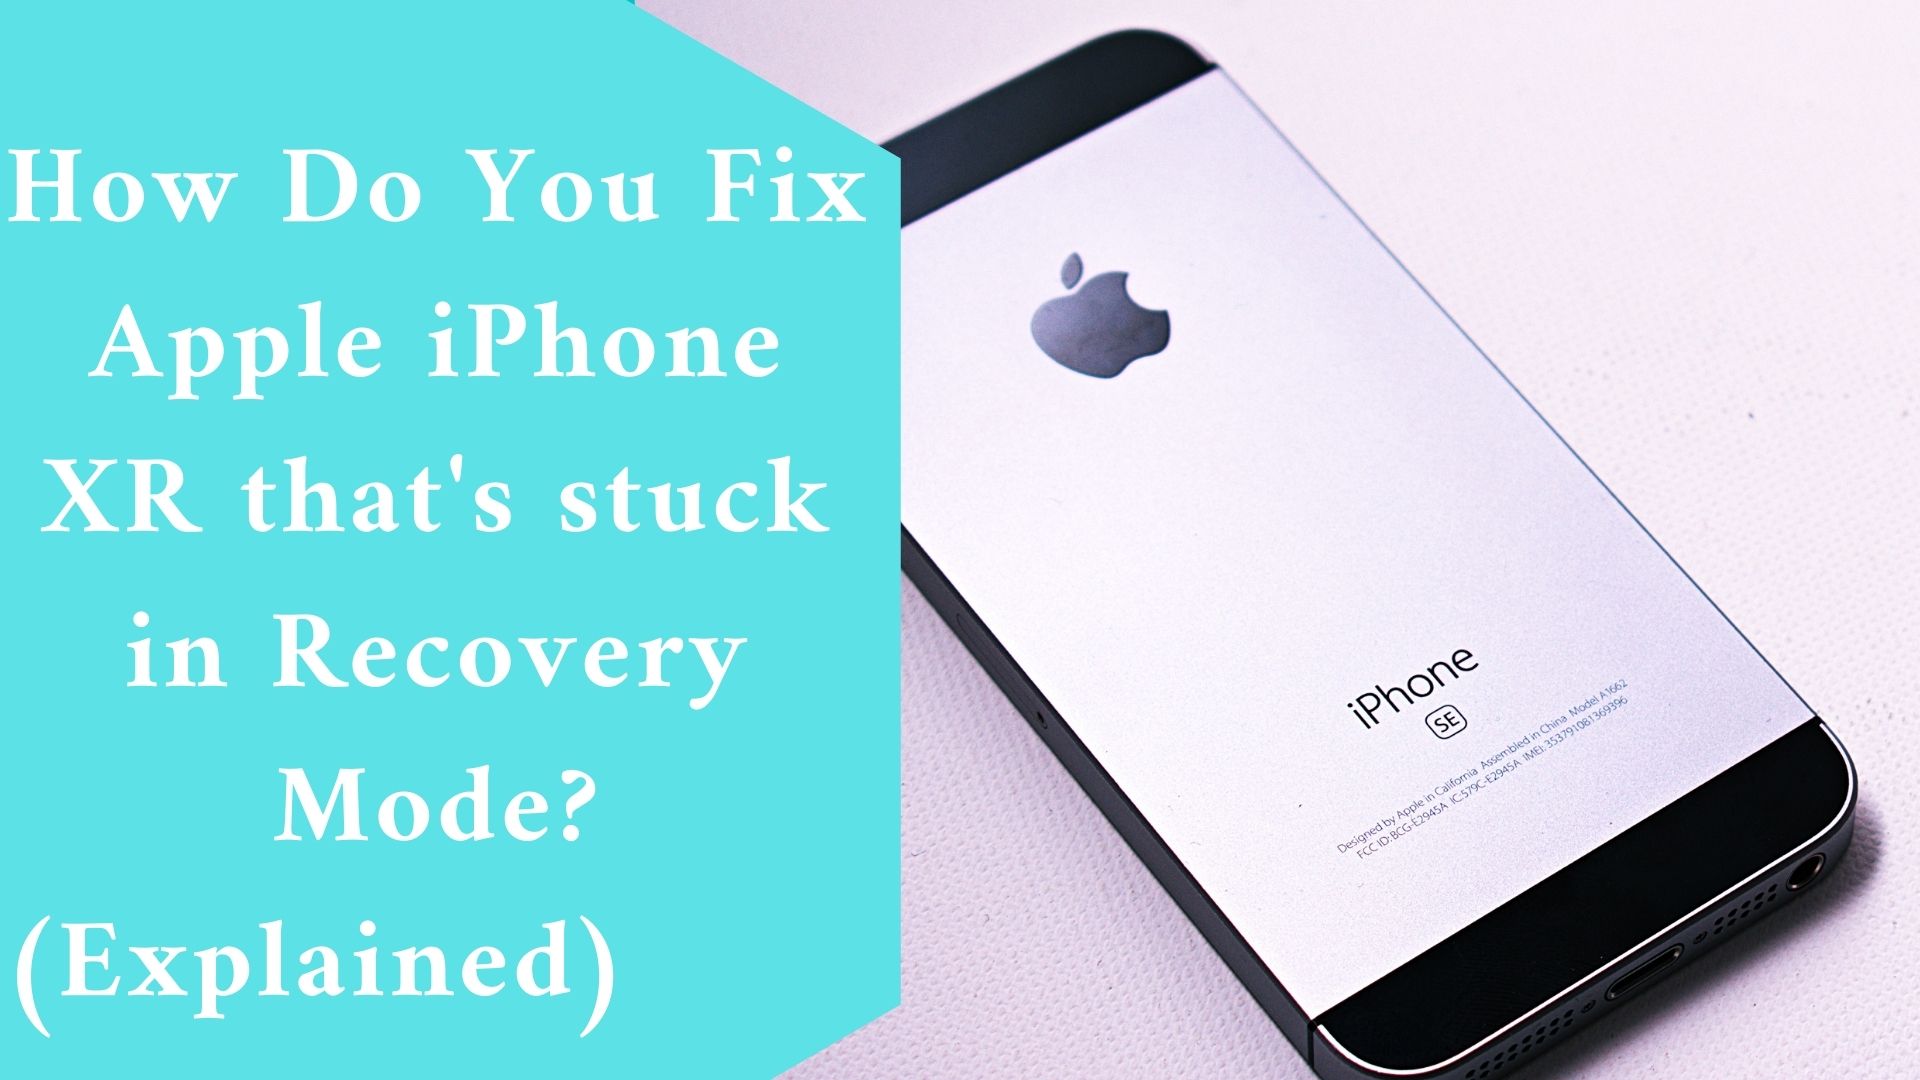 How Do You Fix Apple iPhone XR that’s stuck in Recovery Mode? (Explained)